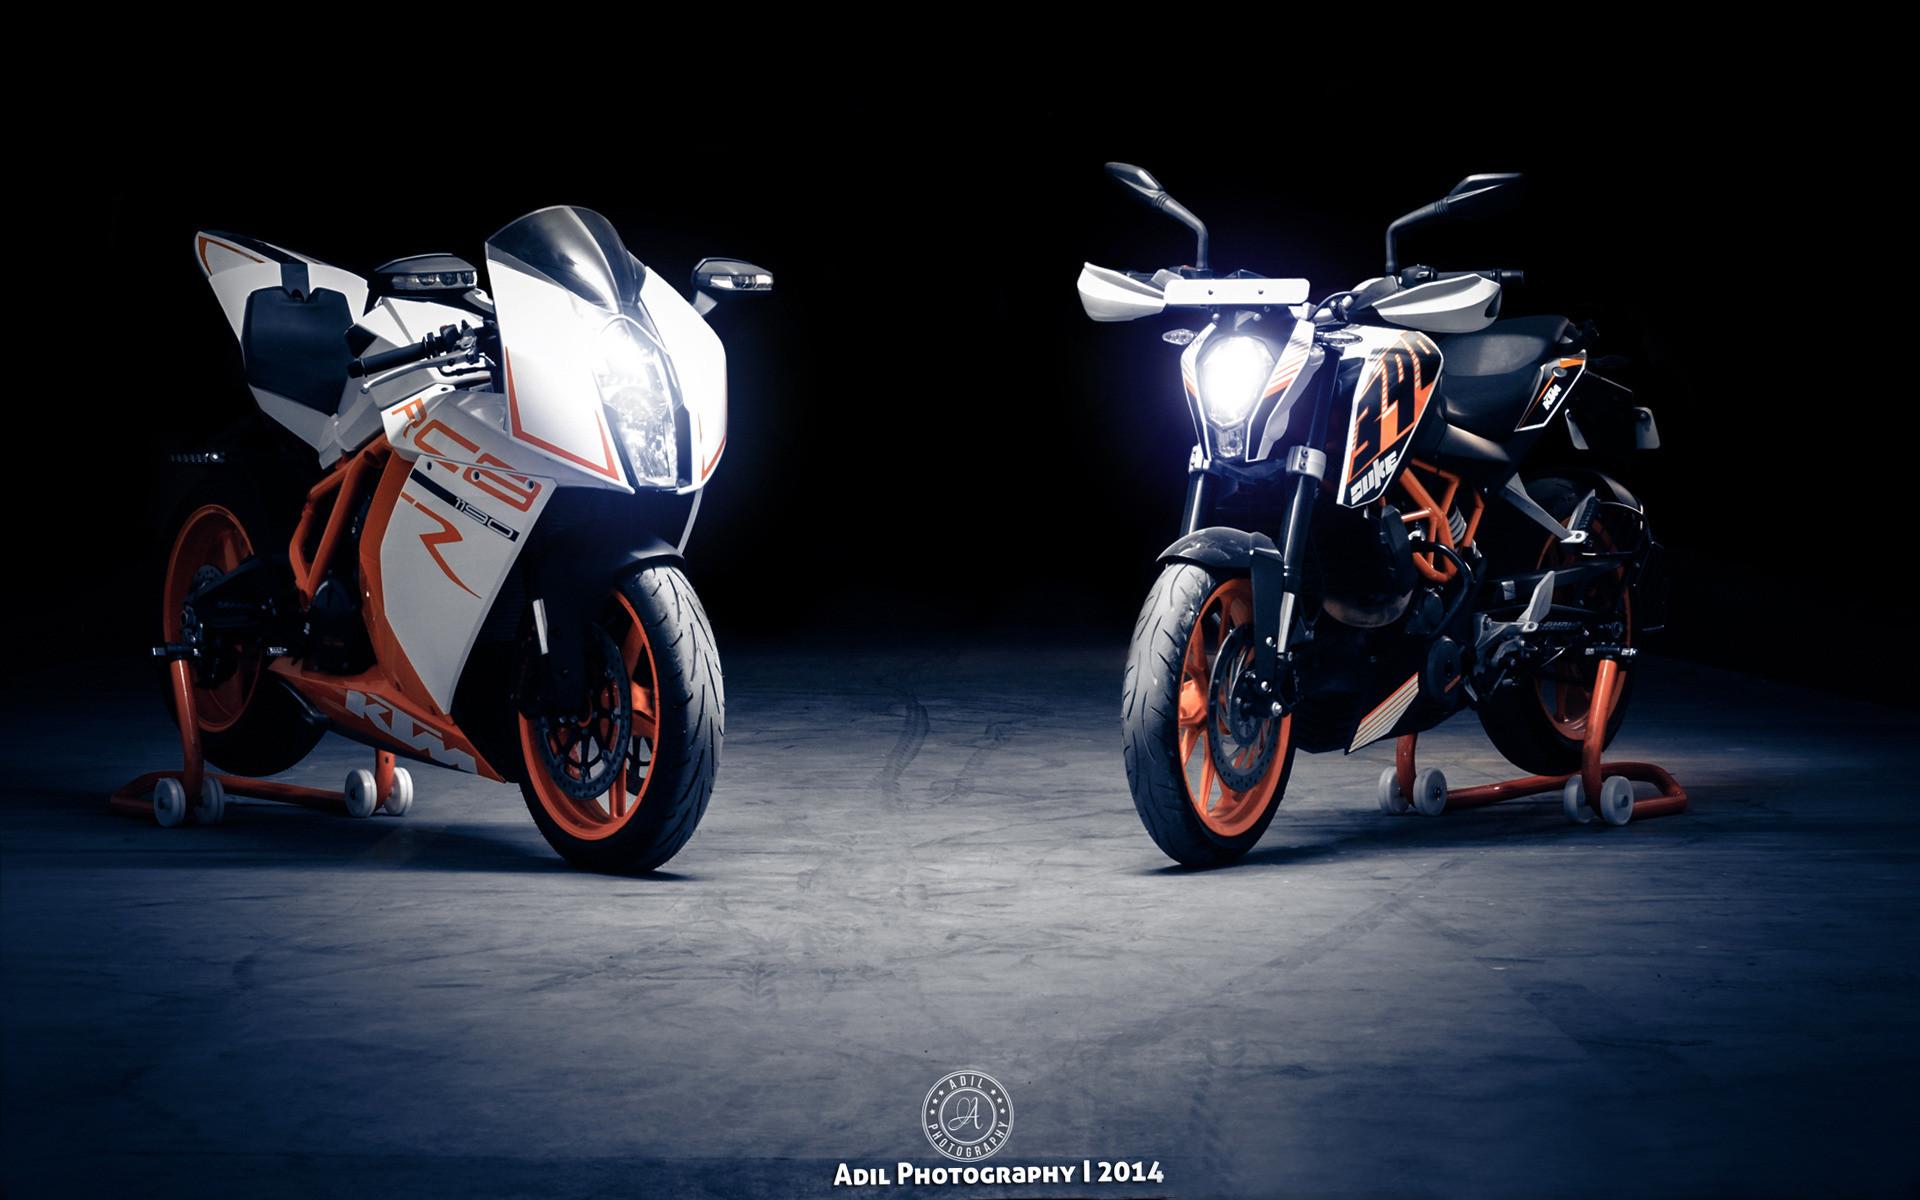 Rc 390 Wallpaper Group , Download for free